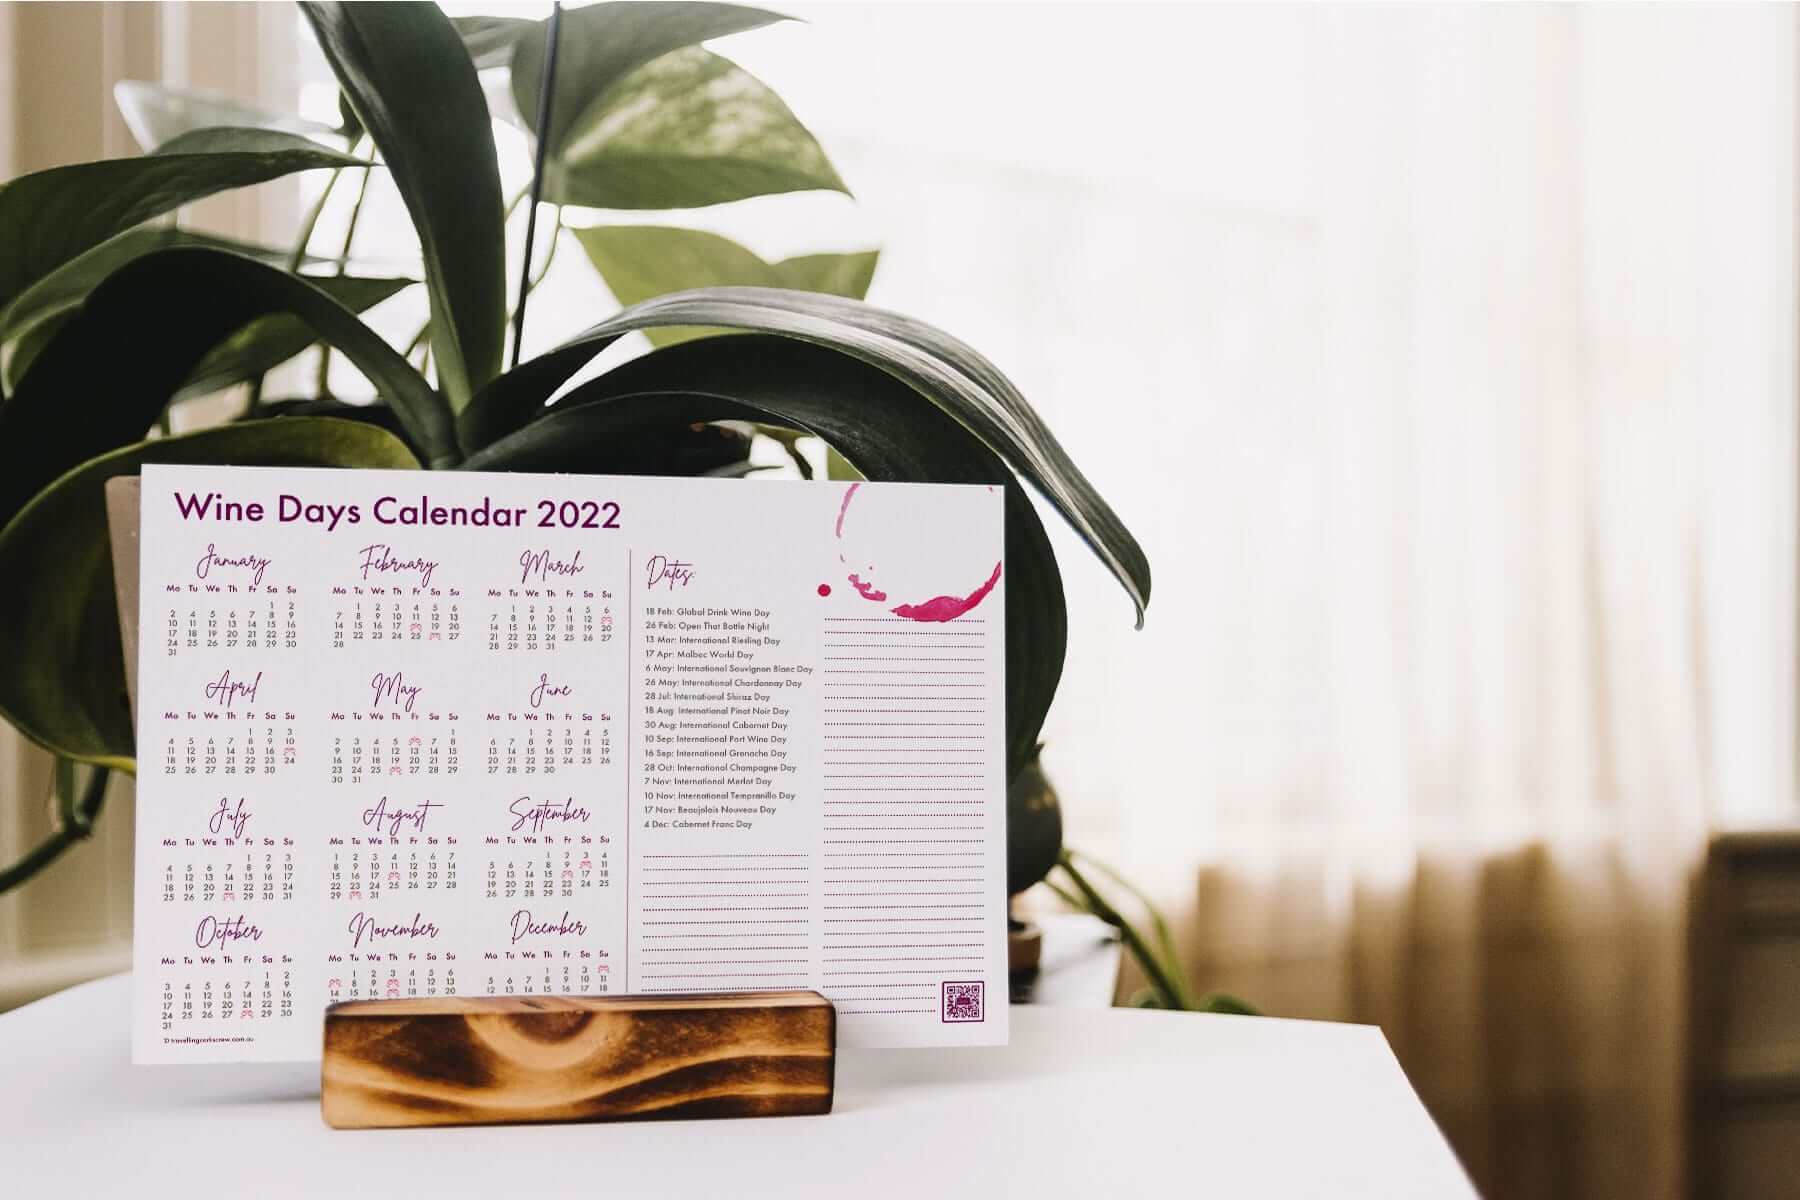 2022 Wine Days Calendar printed out and displayed on table